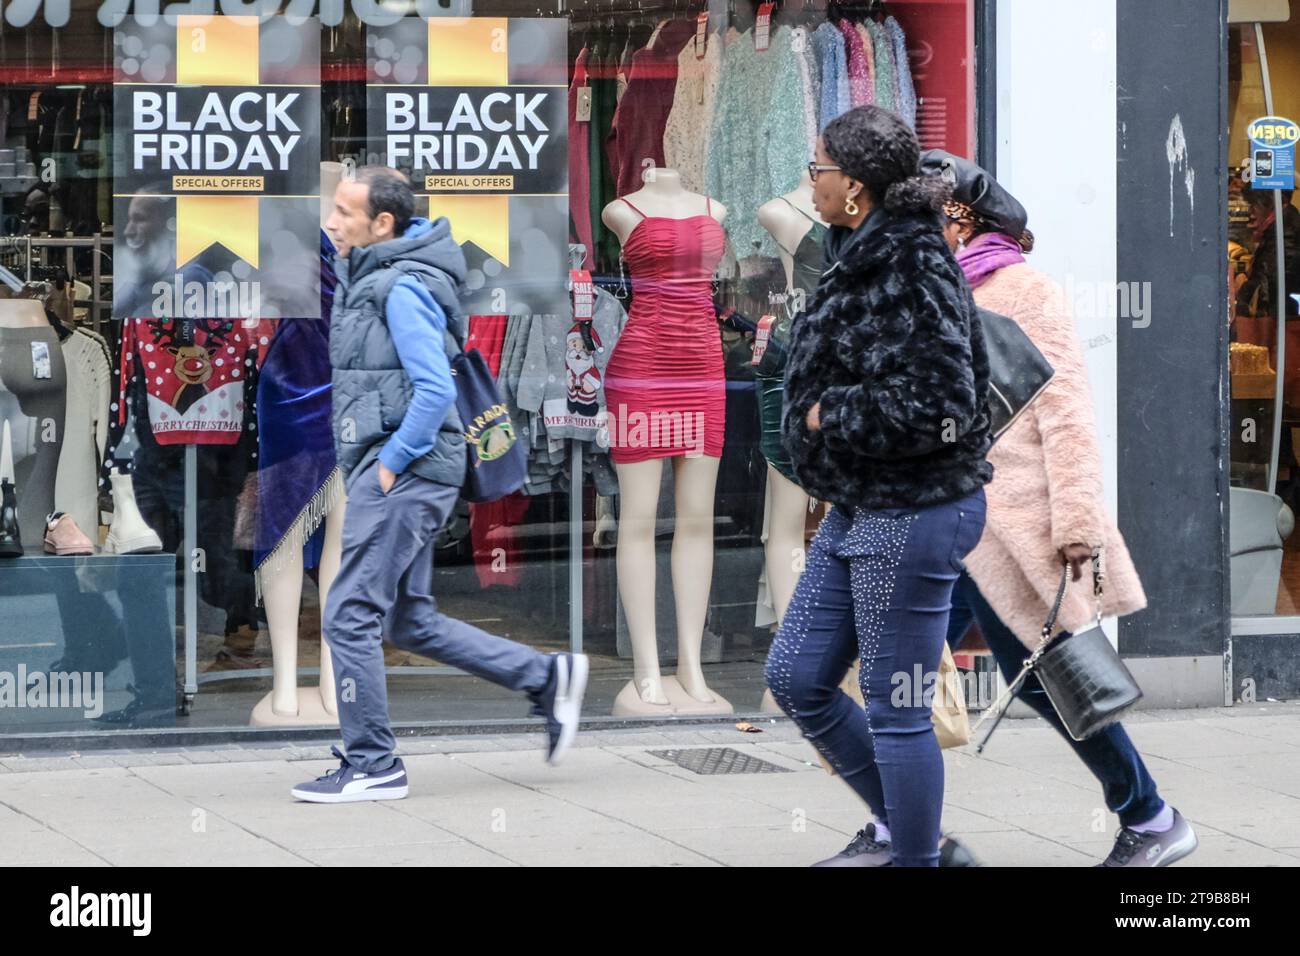 https://c8.alamy.com/comp/2T9B8BH/bristol-uk-24th-nov-2023-shops-in-bristol-city-centre-or-the-broadmead-shopping-quarter-with-black-friday-signs-black-friday-is-the-day-after-the-american-thanksgiving-holiday-which-has-now-become-a-prompt-for-christmas-shopping-worldwide-credit-jmf-newsalamy-live-news-2T9B8BH.jpg